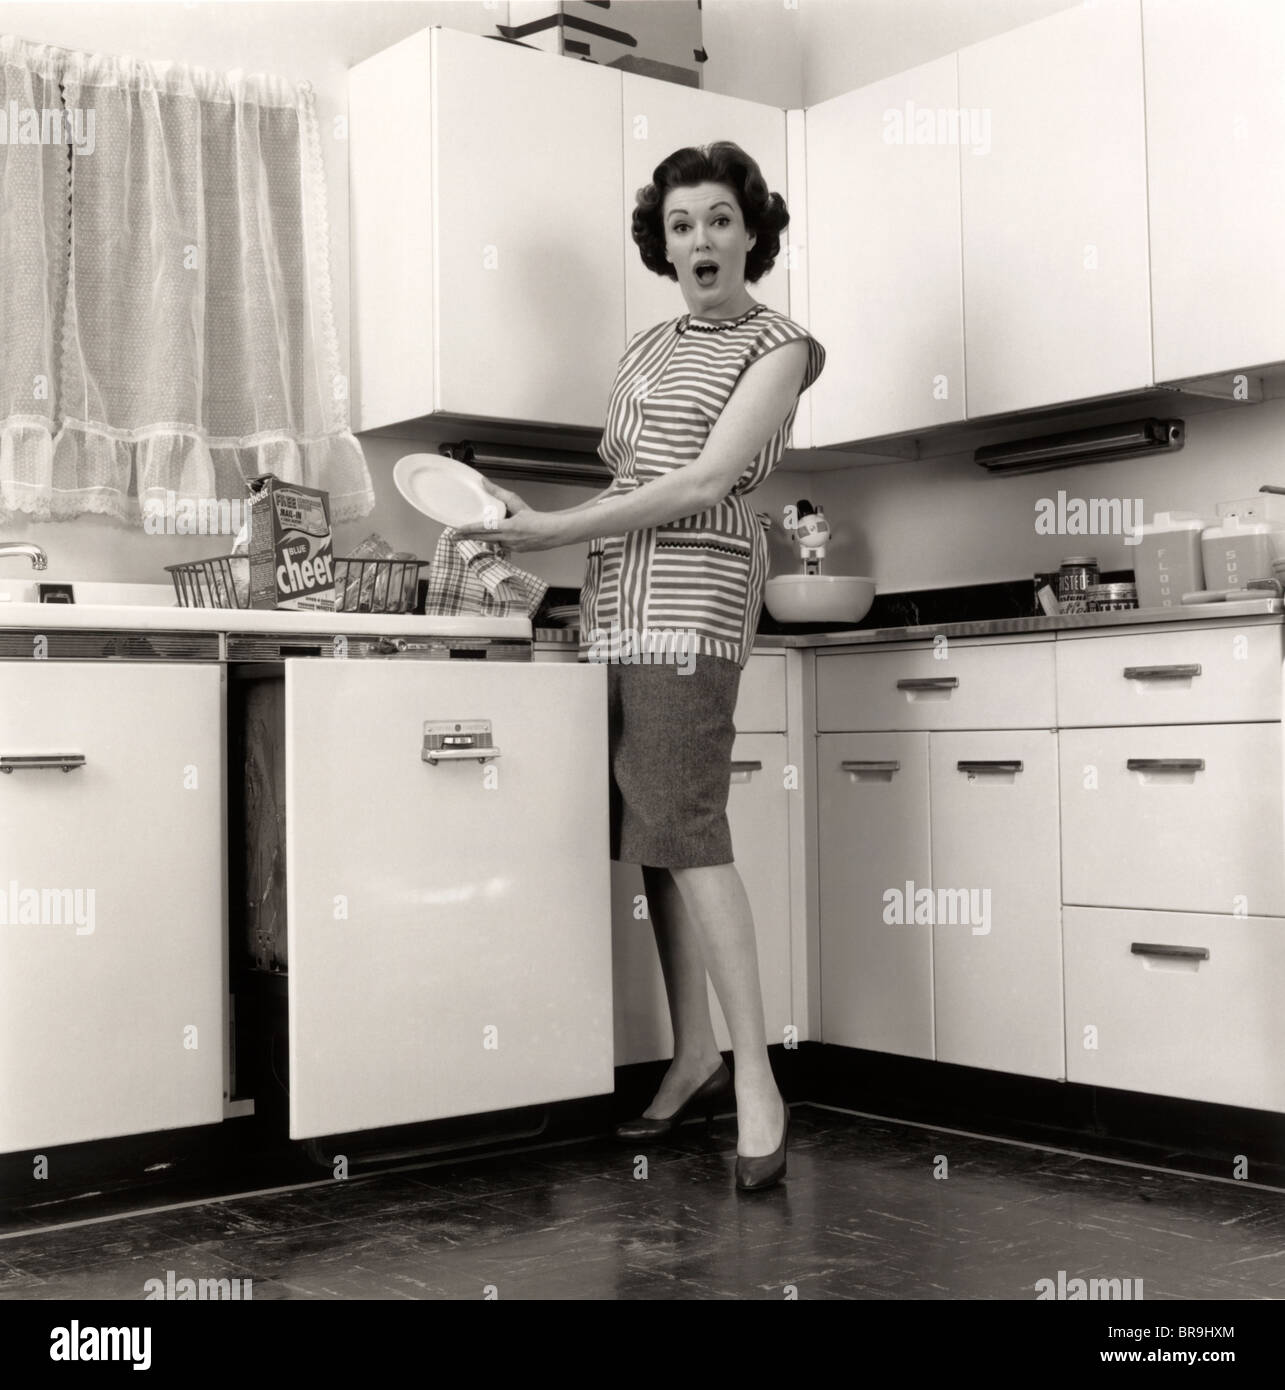 1950s WOMAN HOUSEWIFE WEARING SMOCK PUTTING DISHES IN AUTOMATIC DISHWASHER IN SUBURBAN KITCHEN LOOKING AT CAMERA Stock Photo